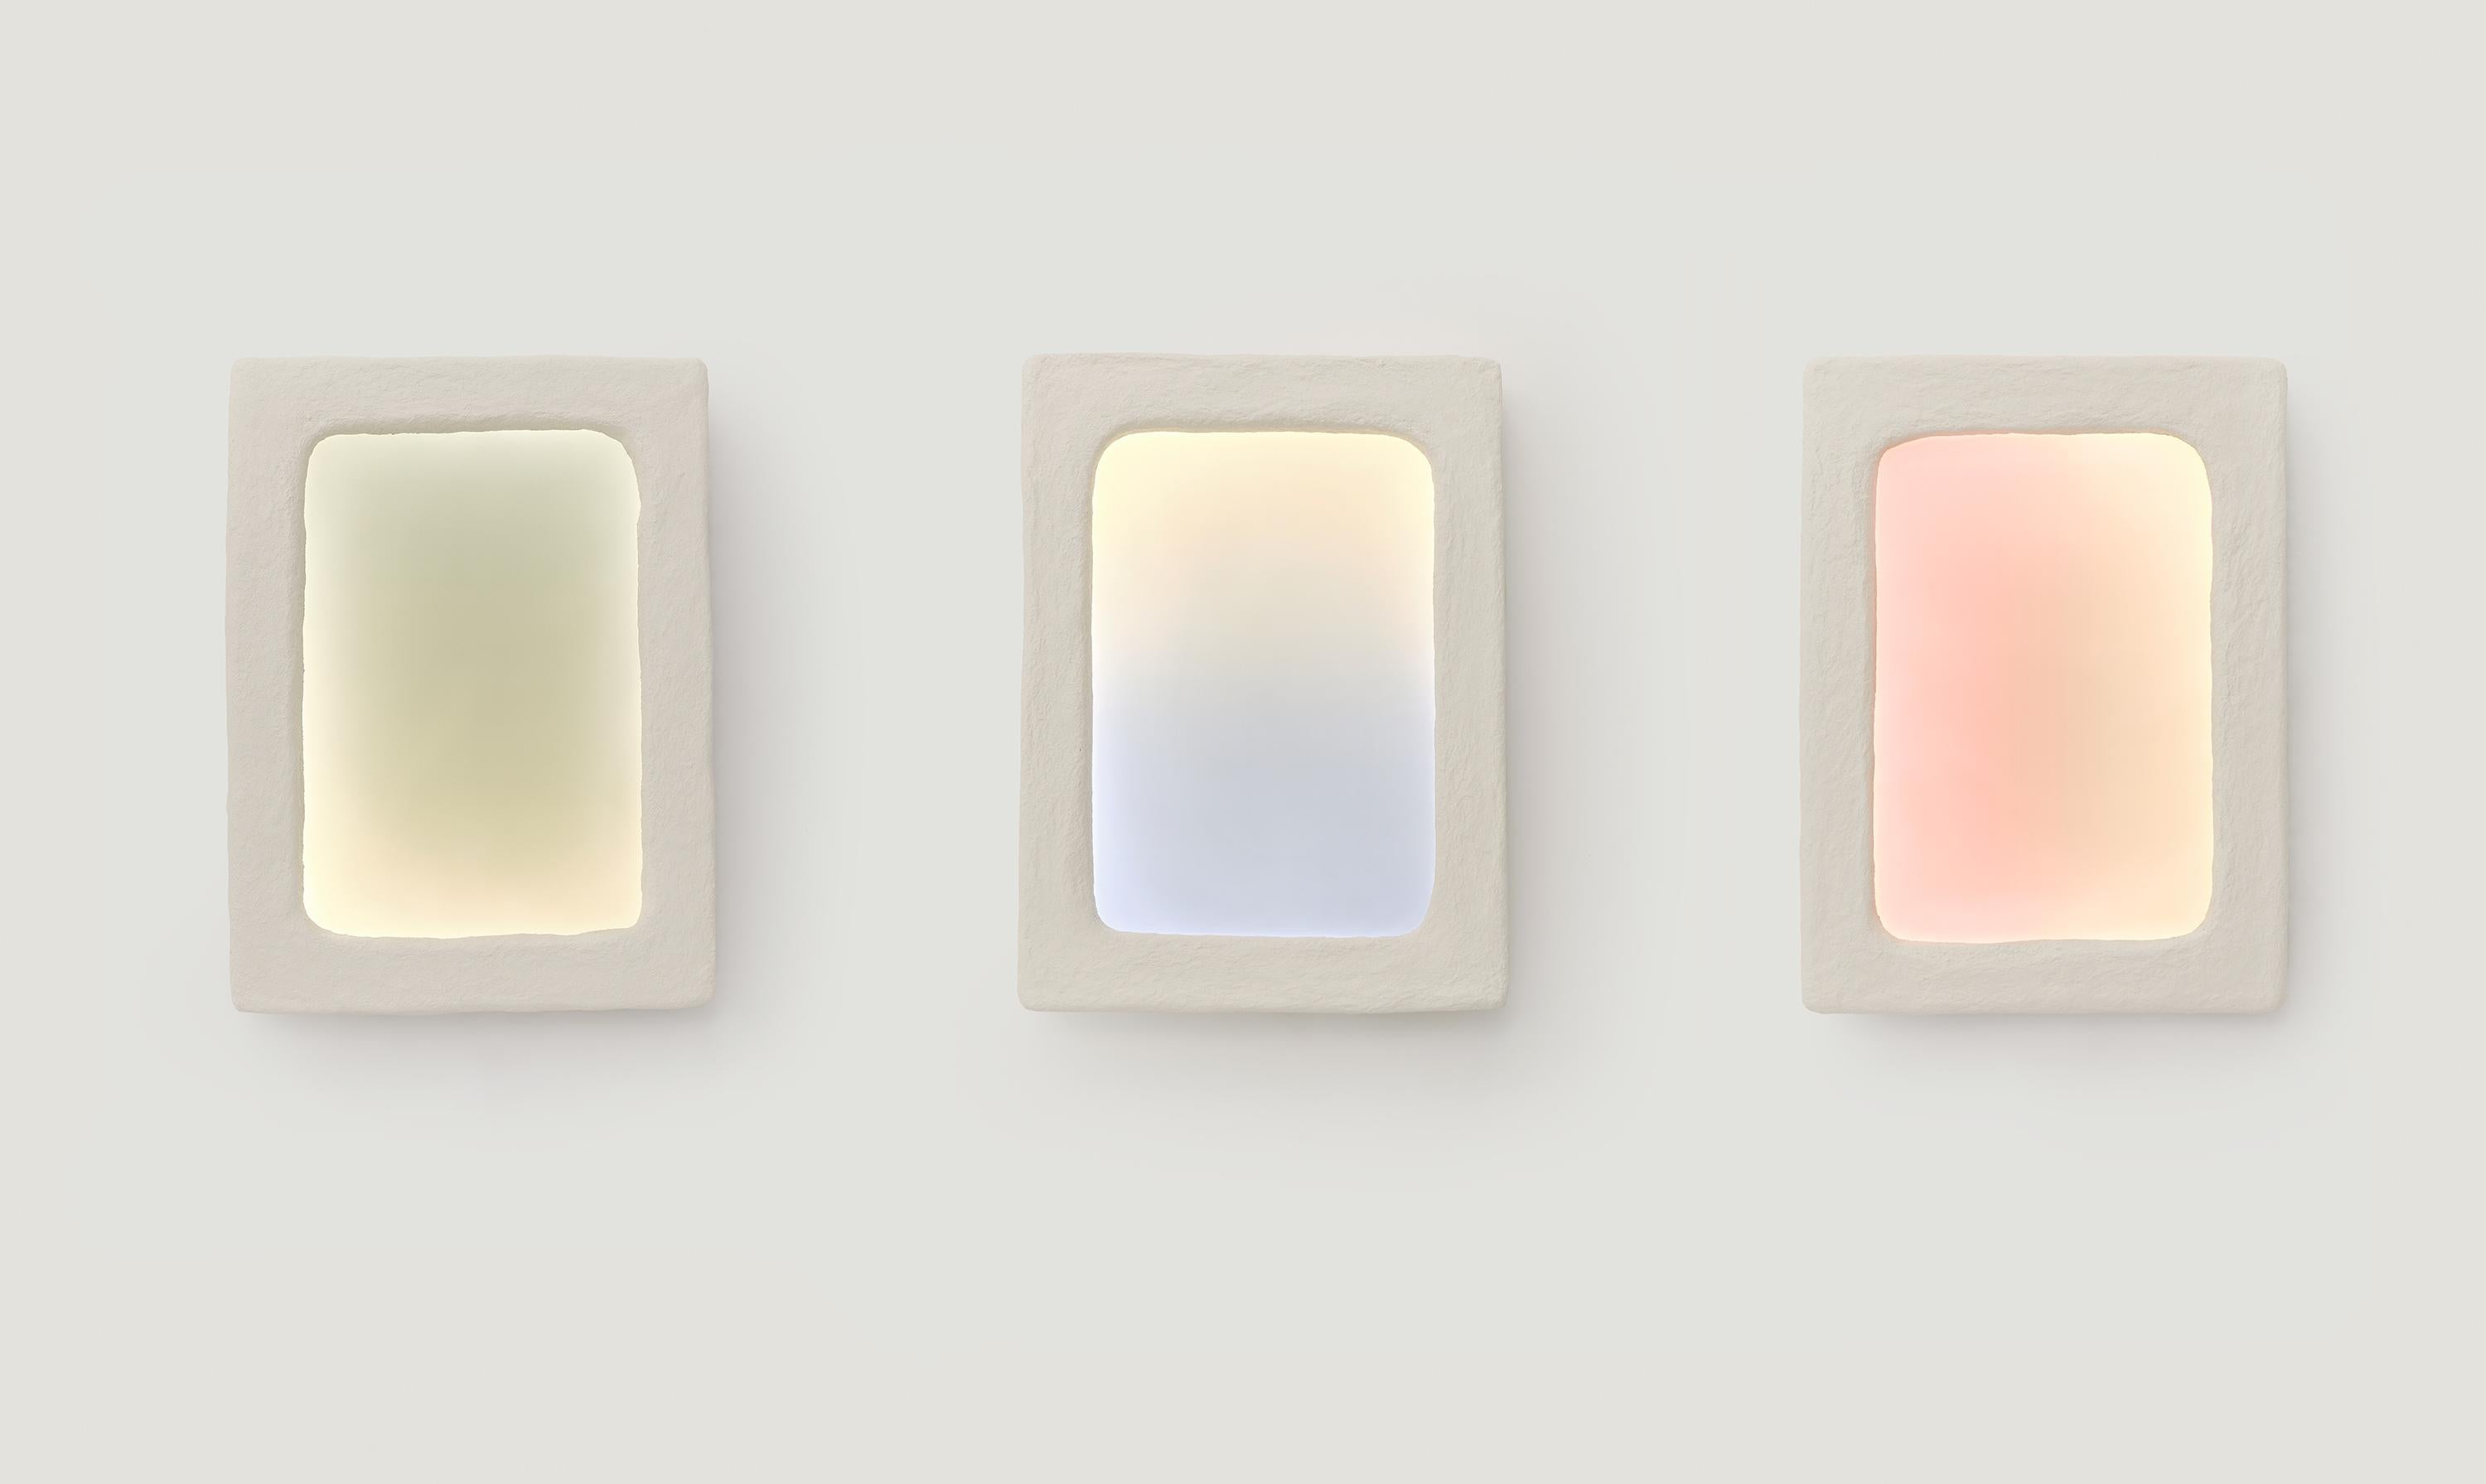 Bae-Chae series is a hand-painted light that subtly embrace a traditional painting method.

The series draws inspiration from the ancient Korean portrait technique ‘Bae-Chae,' which pigments on the back of a sheet to show through the front, creating